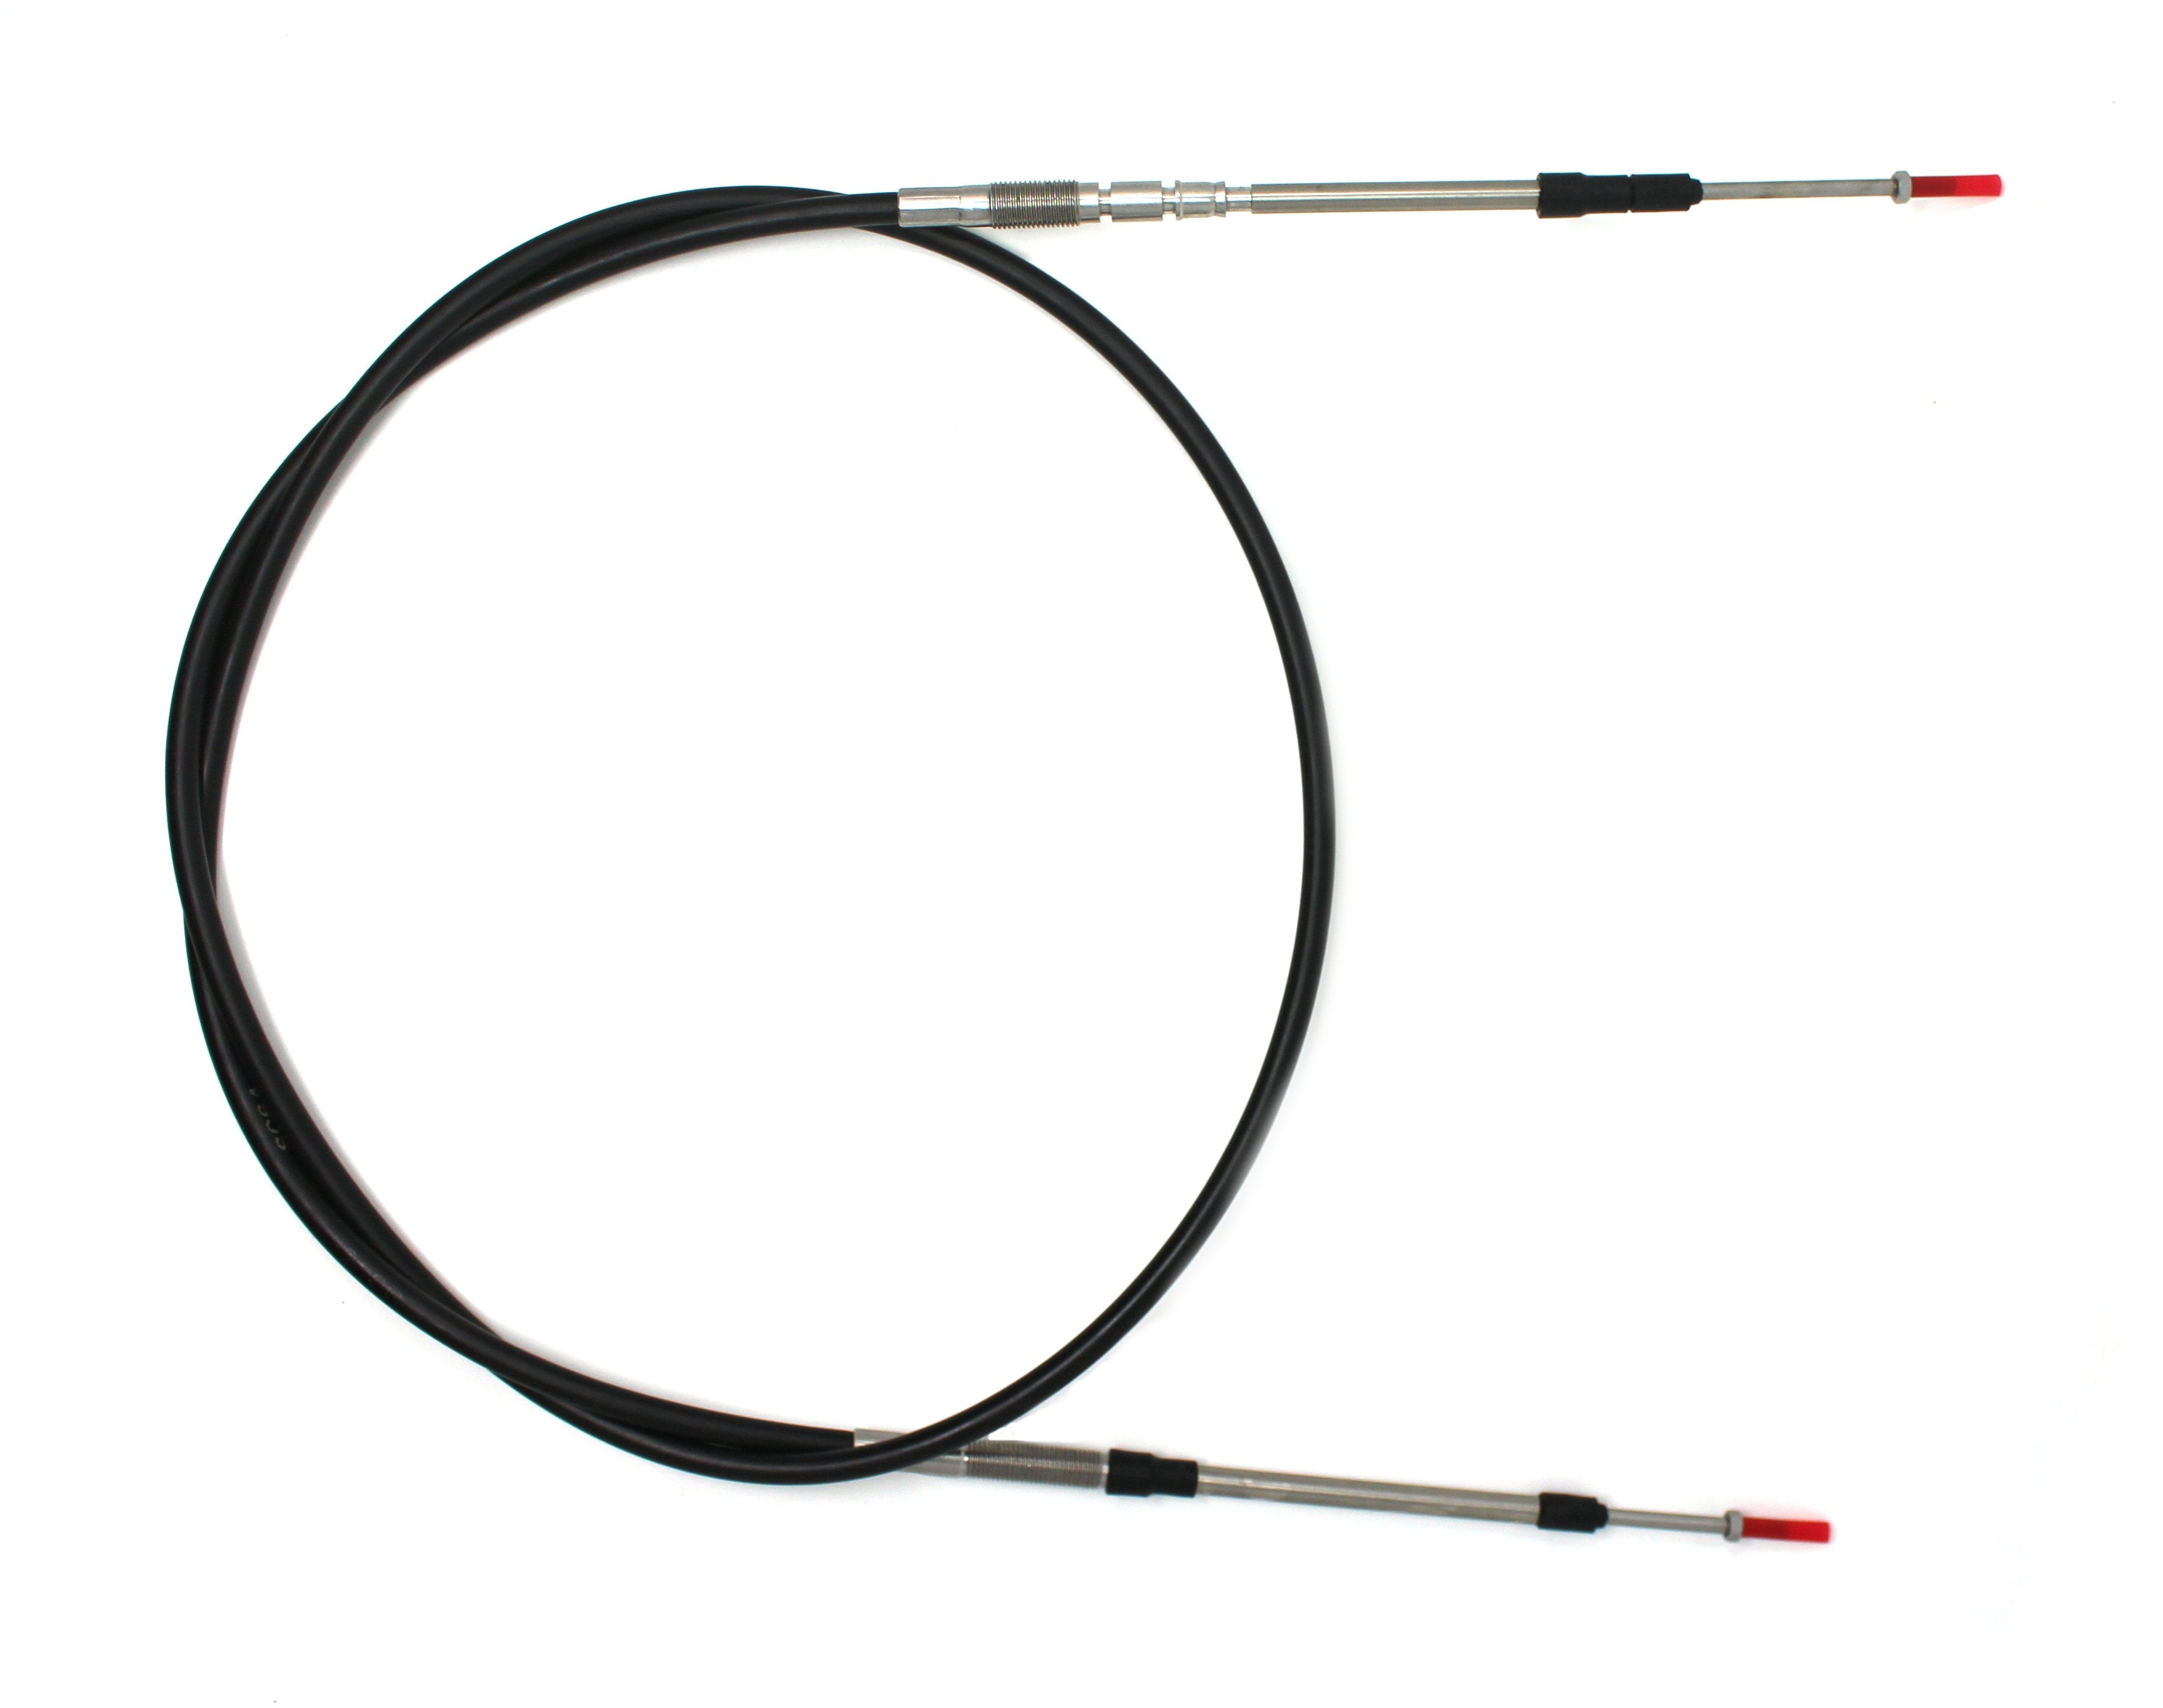 JSP Replacement Seadoo Steering Cable GTX DI/GTX 4TEC/155/215 RXT 